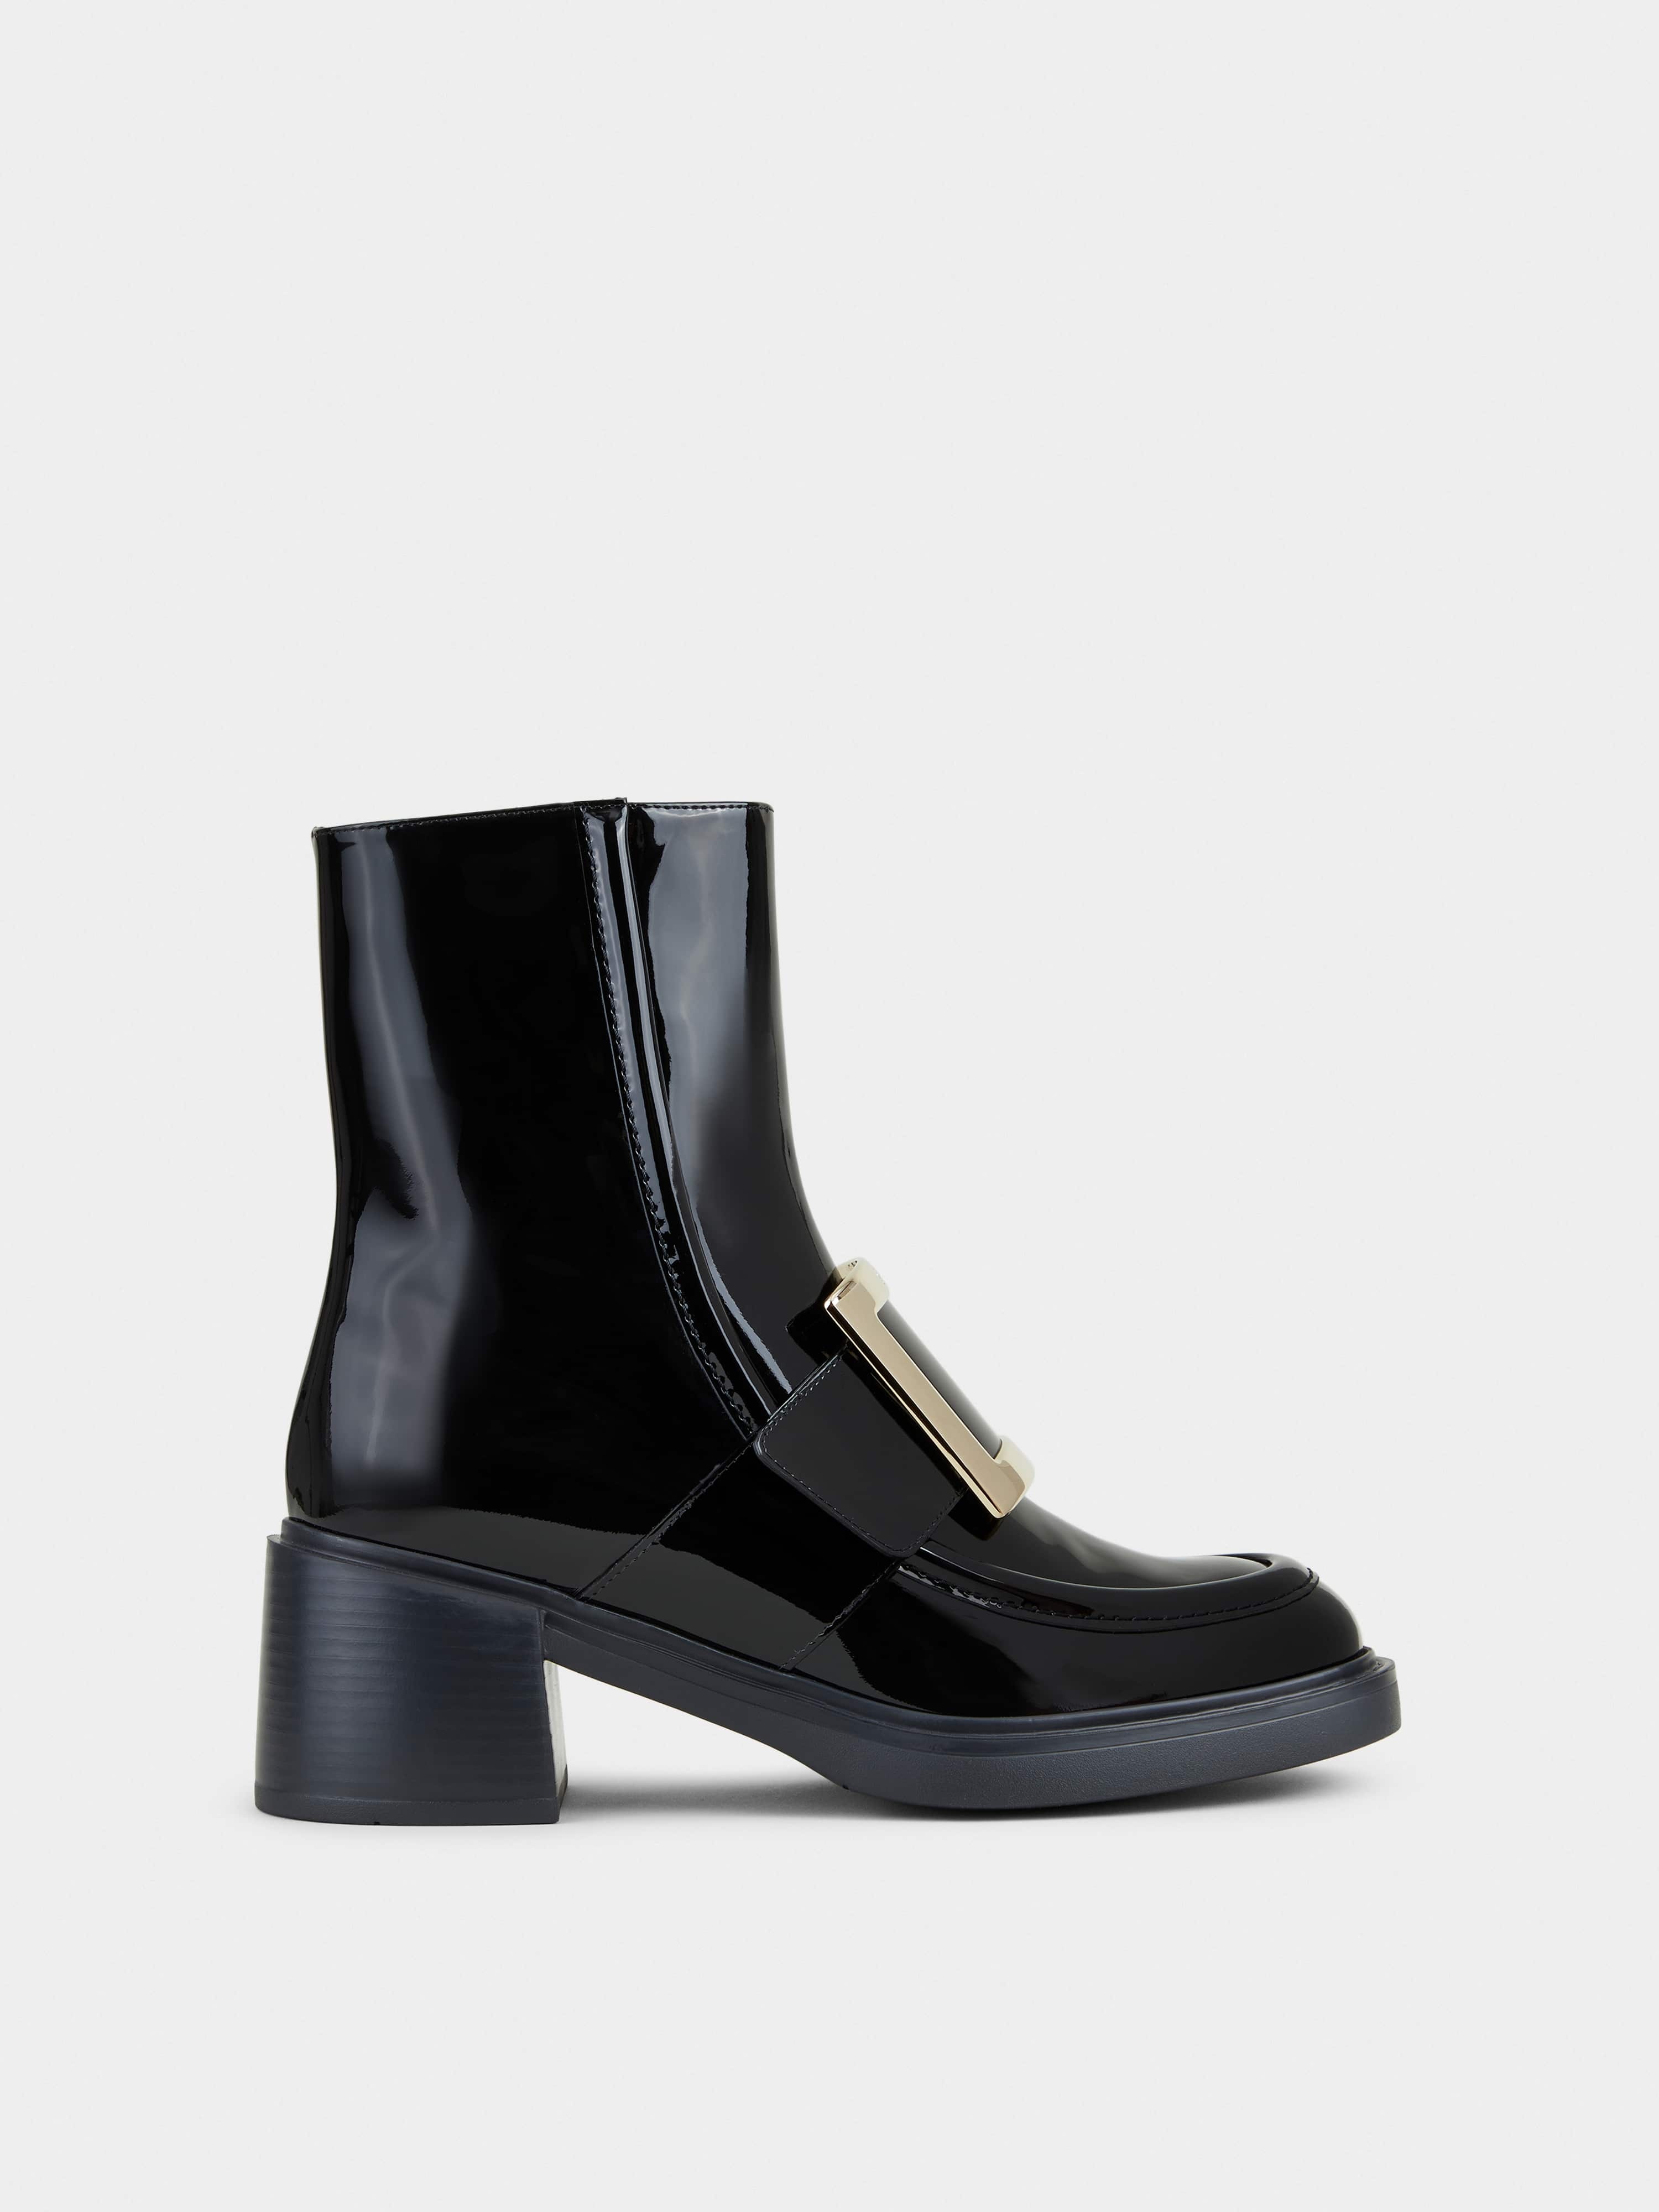 Viv' Rangers Metal Buckle Ankle Boots in Patent Leather - 1